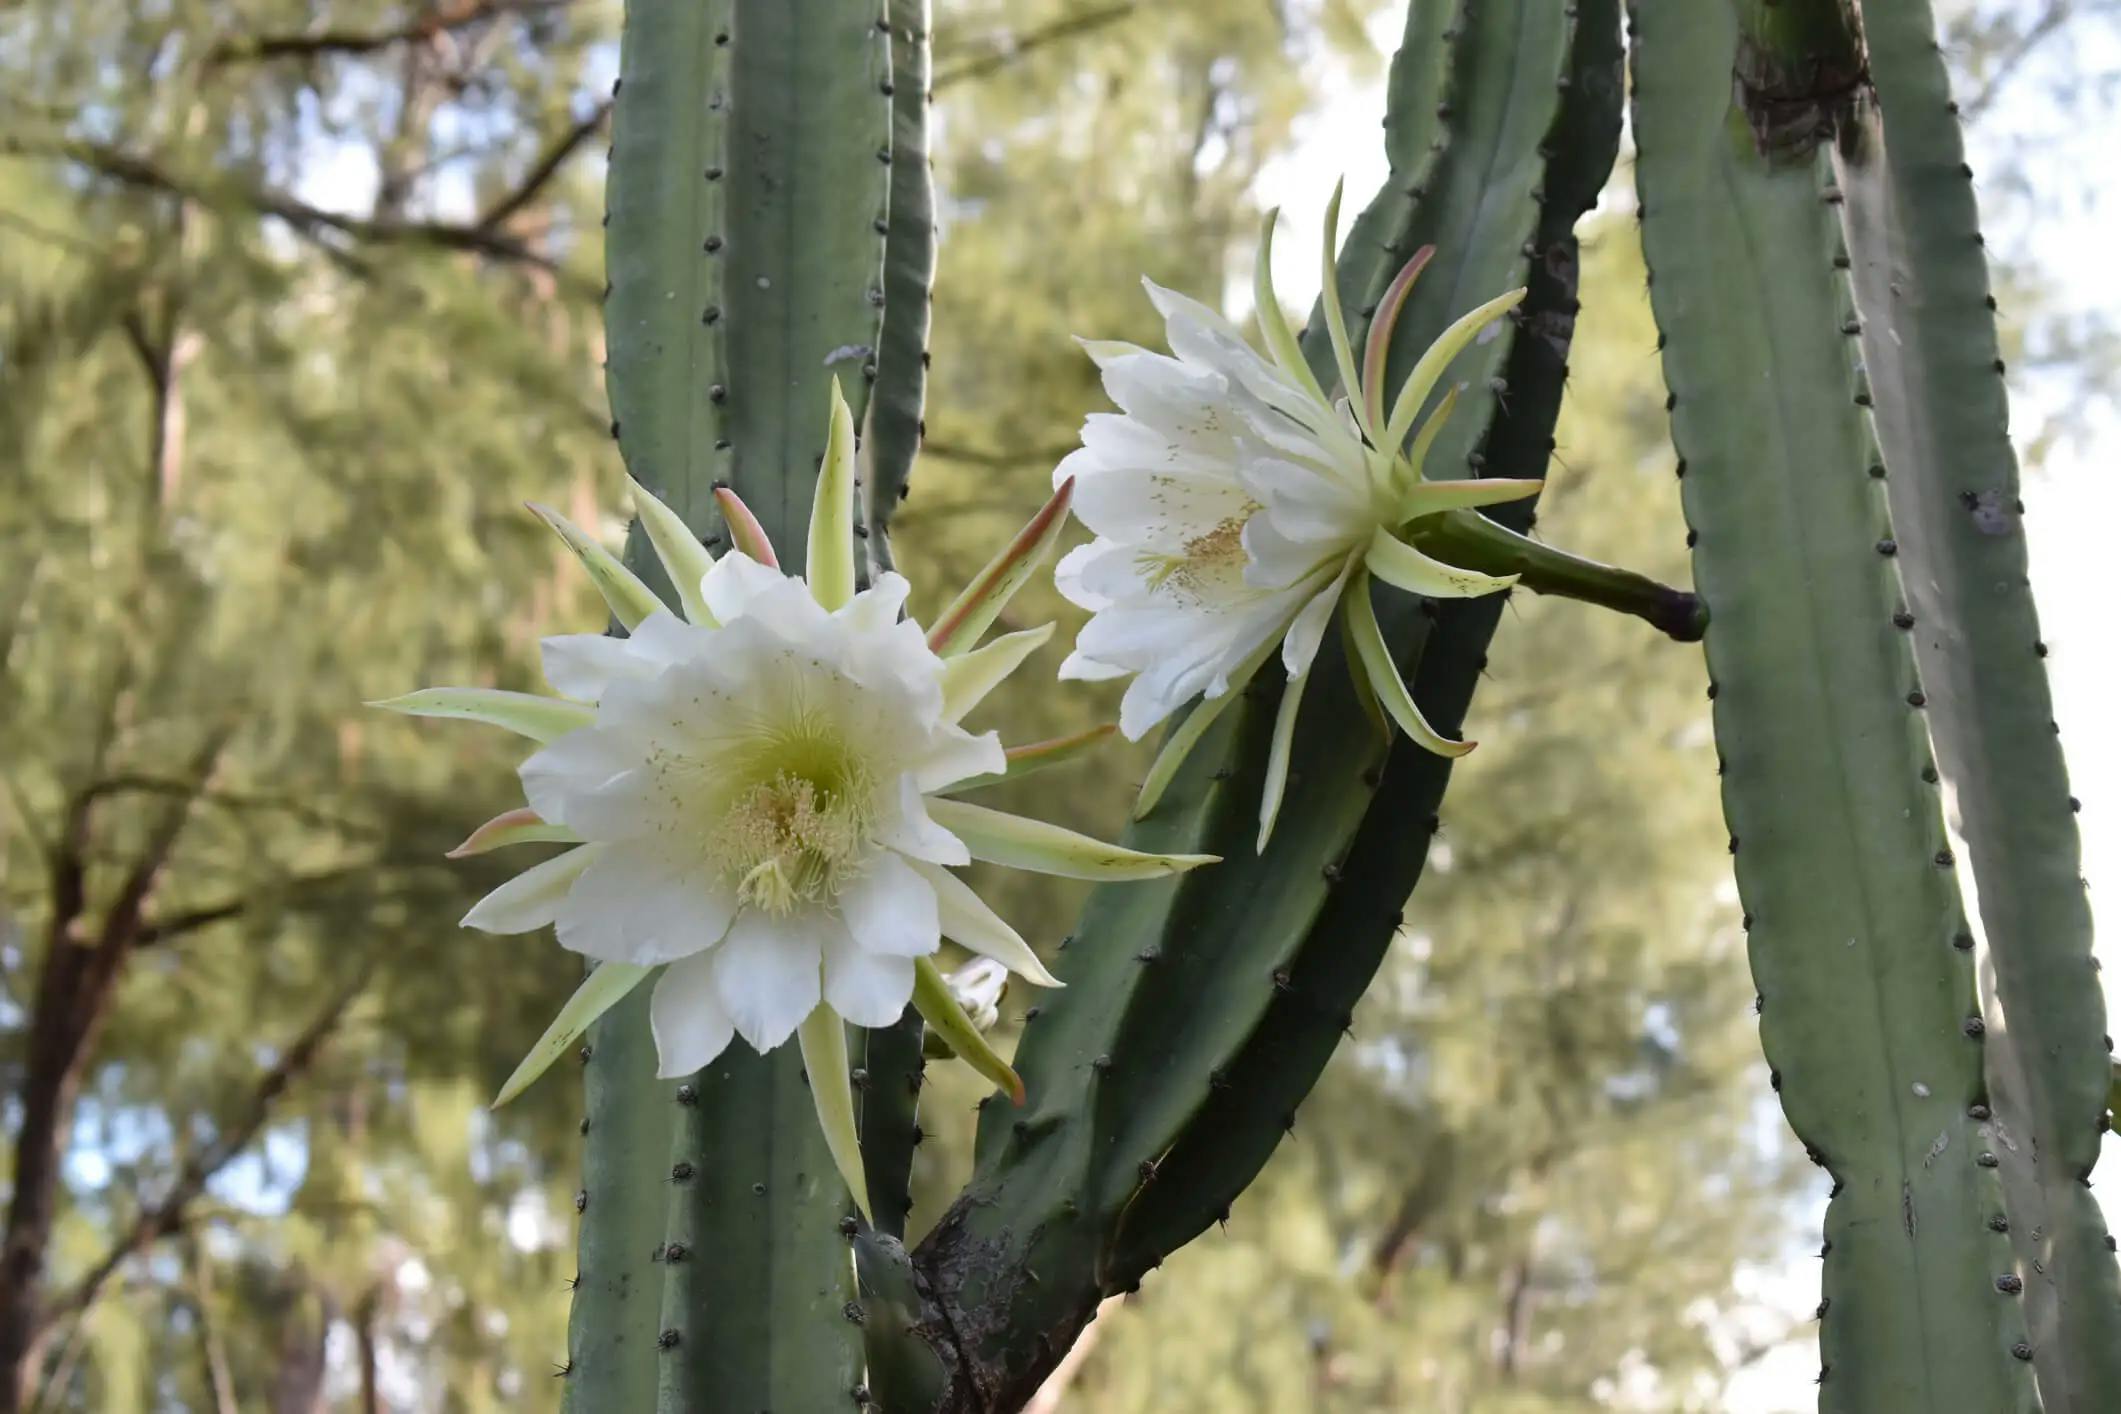 Blooming white flowers on a large san pedro cactus.